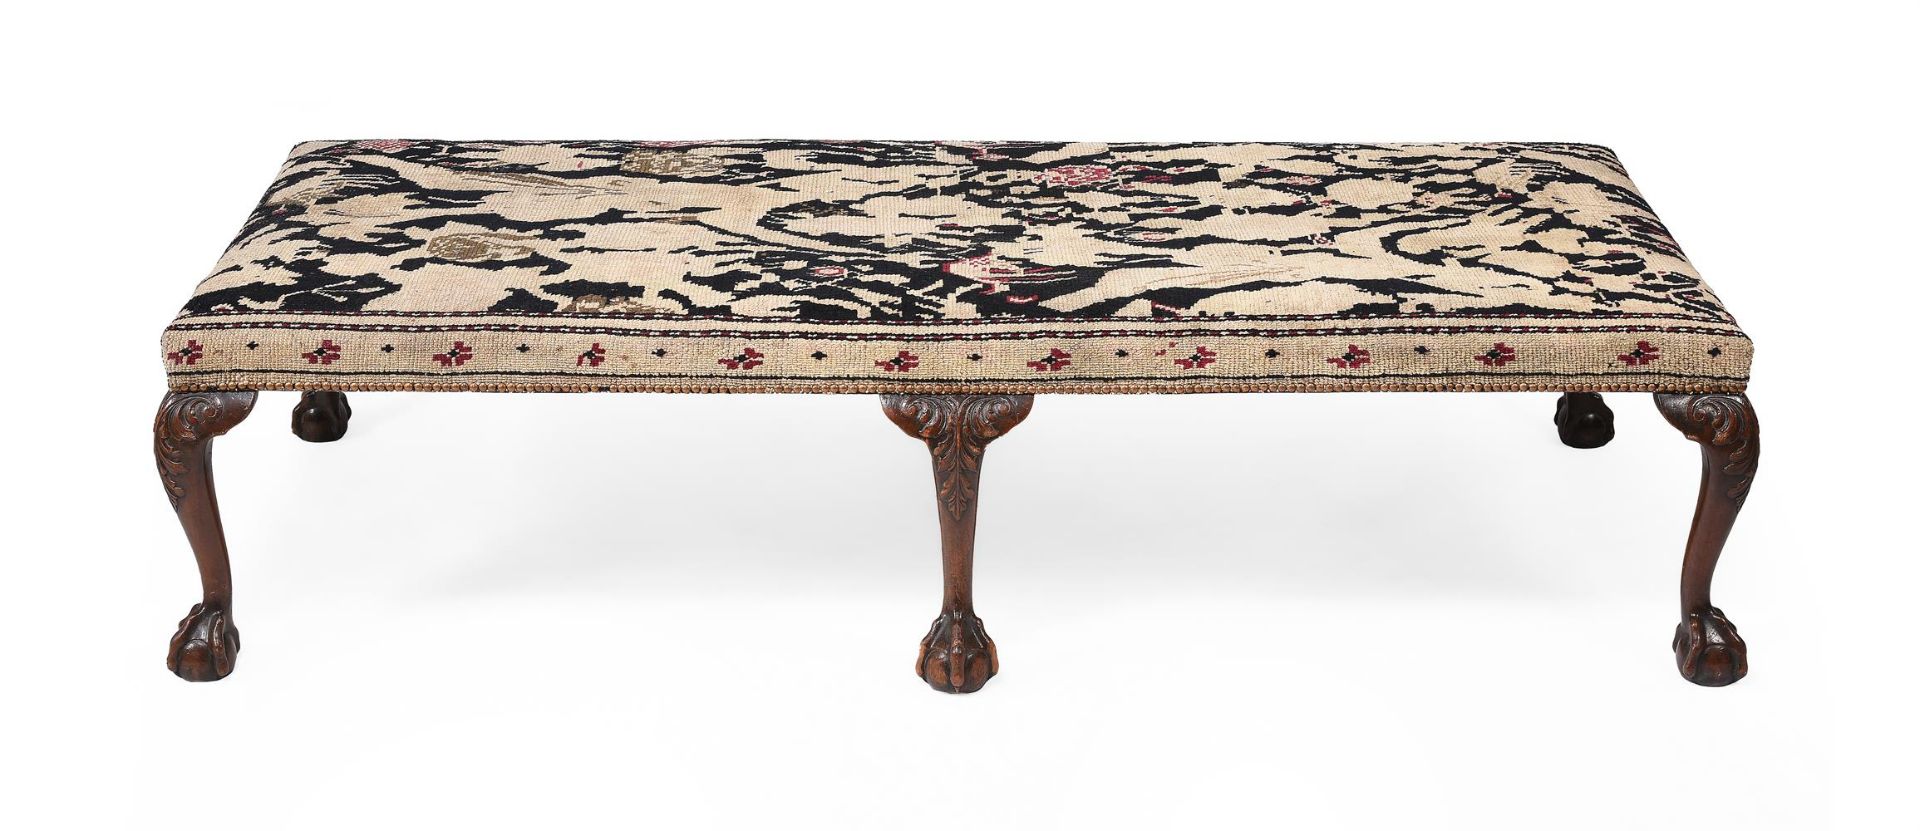 A MAHOGANY OTTOMAN OR STOOL, 19TH CENTURY AND LATER